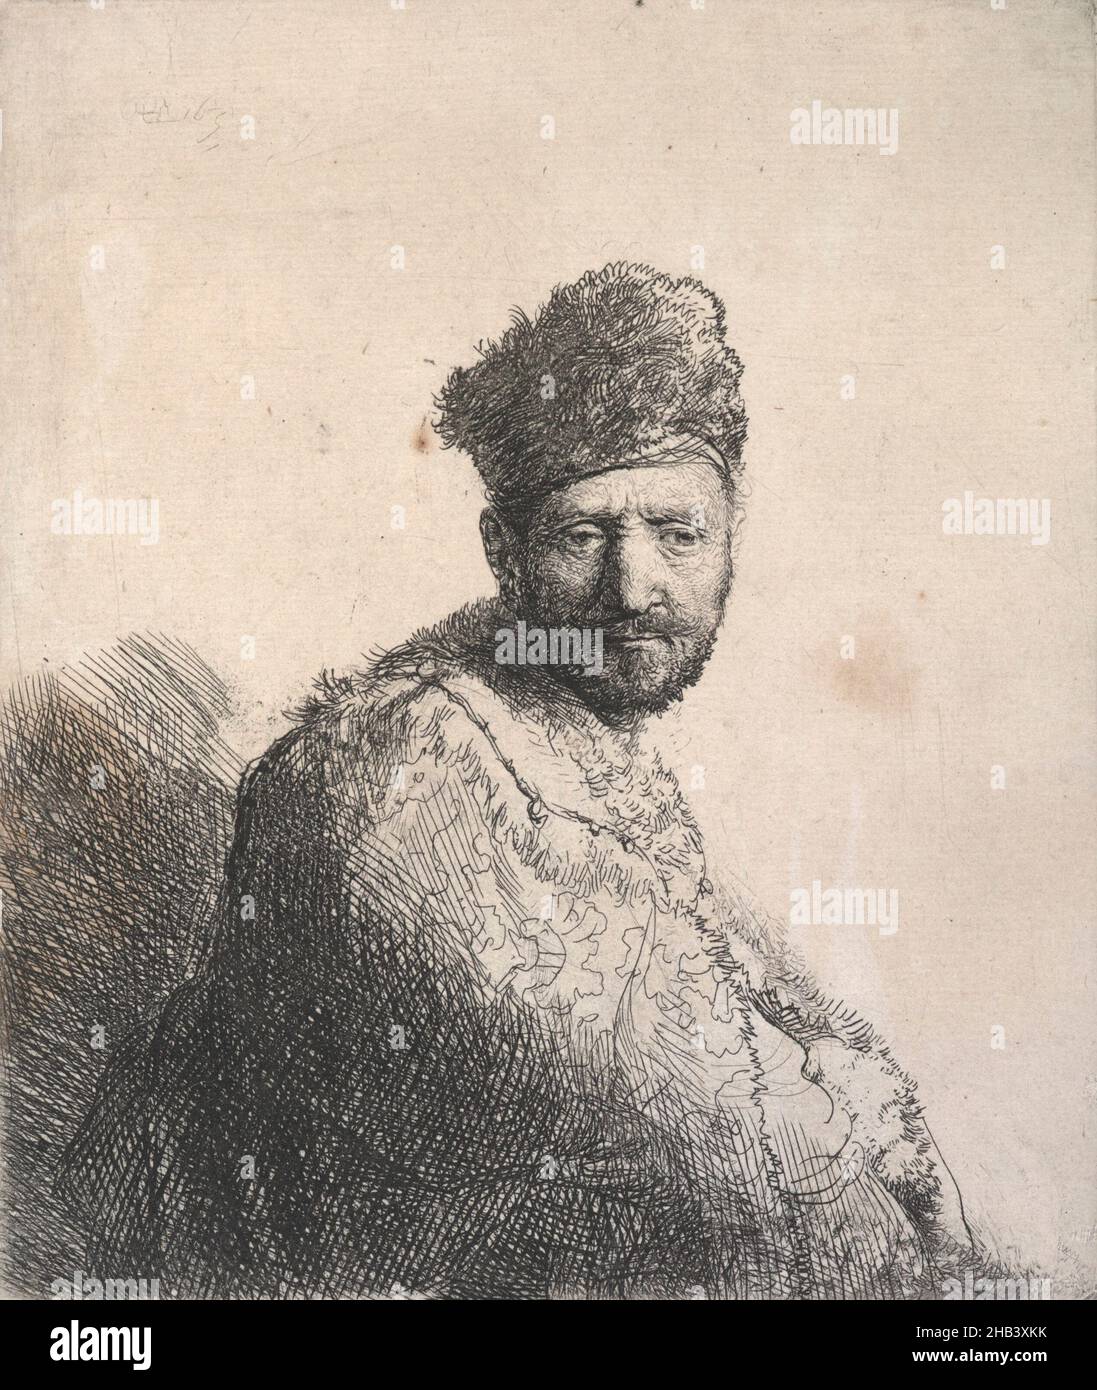 Bearded man, in a furred oriental cap and robe., Rembrandt van Rijn, artist, 1631, Netherlands, etching, During his lifetime, Rembrandt's extraordinary skills as a printmaker were the main source of his international fame. Unlike his oil paintings, prints travelled light and were relatively cheap. For this reason, they soon became very popular with collectors not only within, but also beyond the borders of the Netherlands, and it also explains why, three centuries later, they were affordable for Wellington collector and philanthropist Sir John Ilott, who presented 37 Rembrandt prints Stock Photo